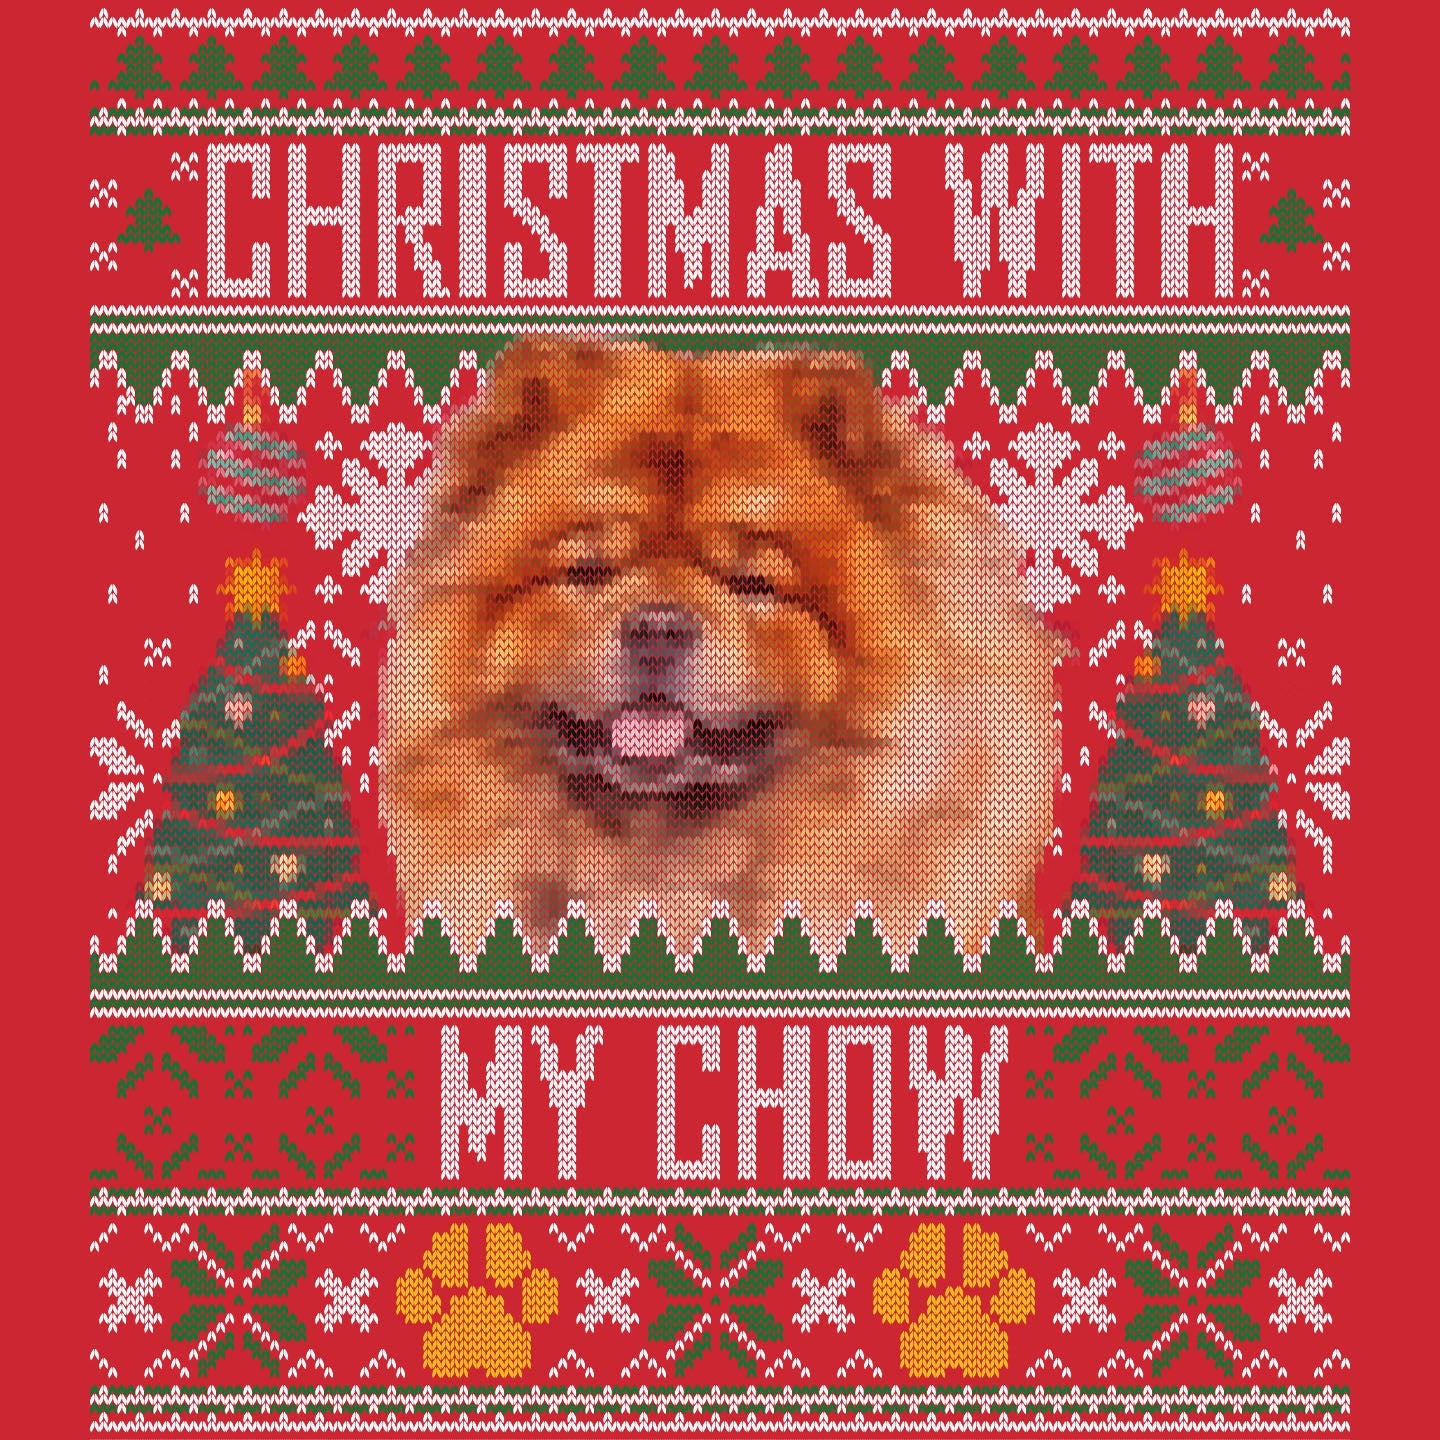 Ugly Sweater Christmas with My Chow Chow - Adult Unisex Long Sleeve T-Shirt